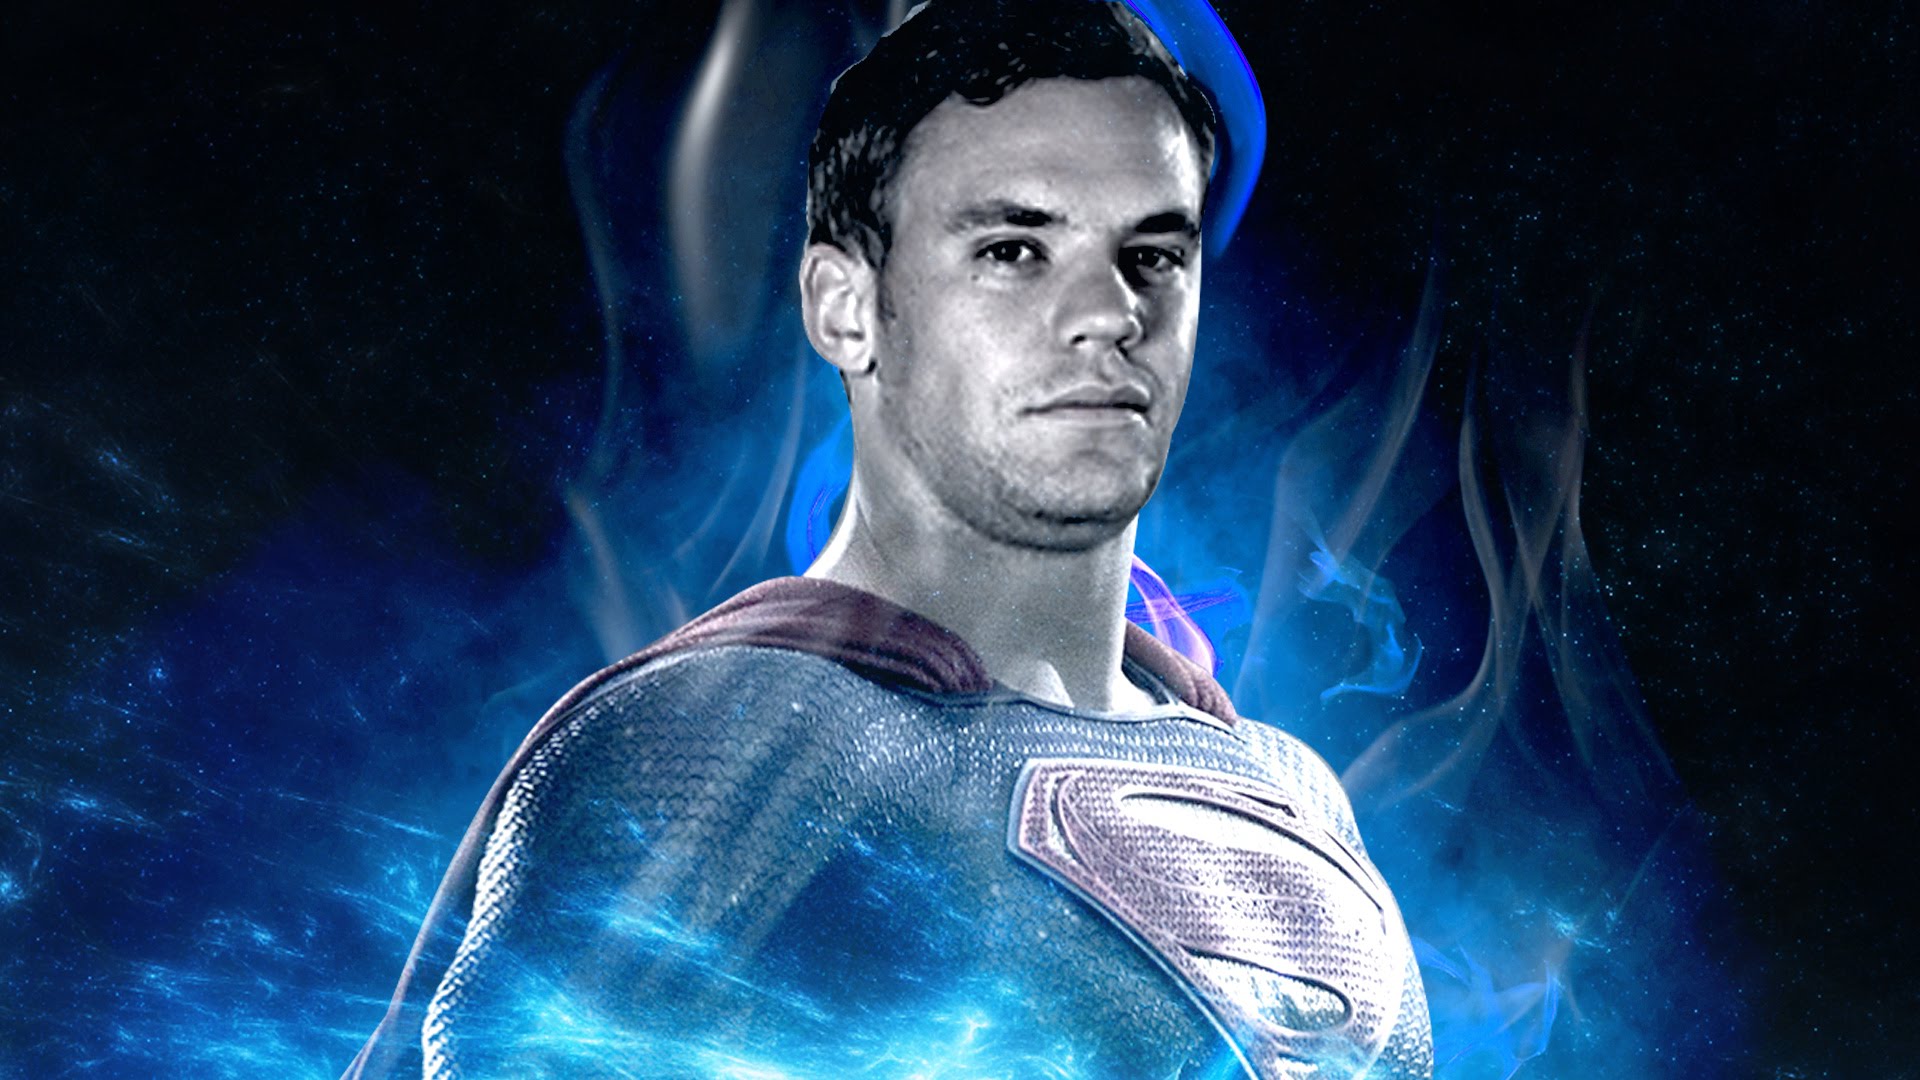 Manuel Neuer Wallpaper High Resolution And Quality